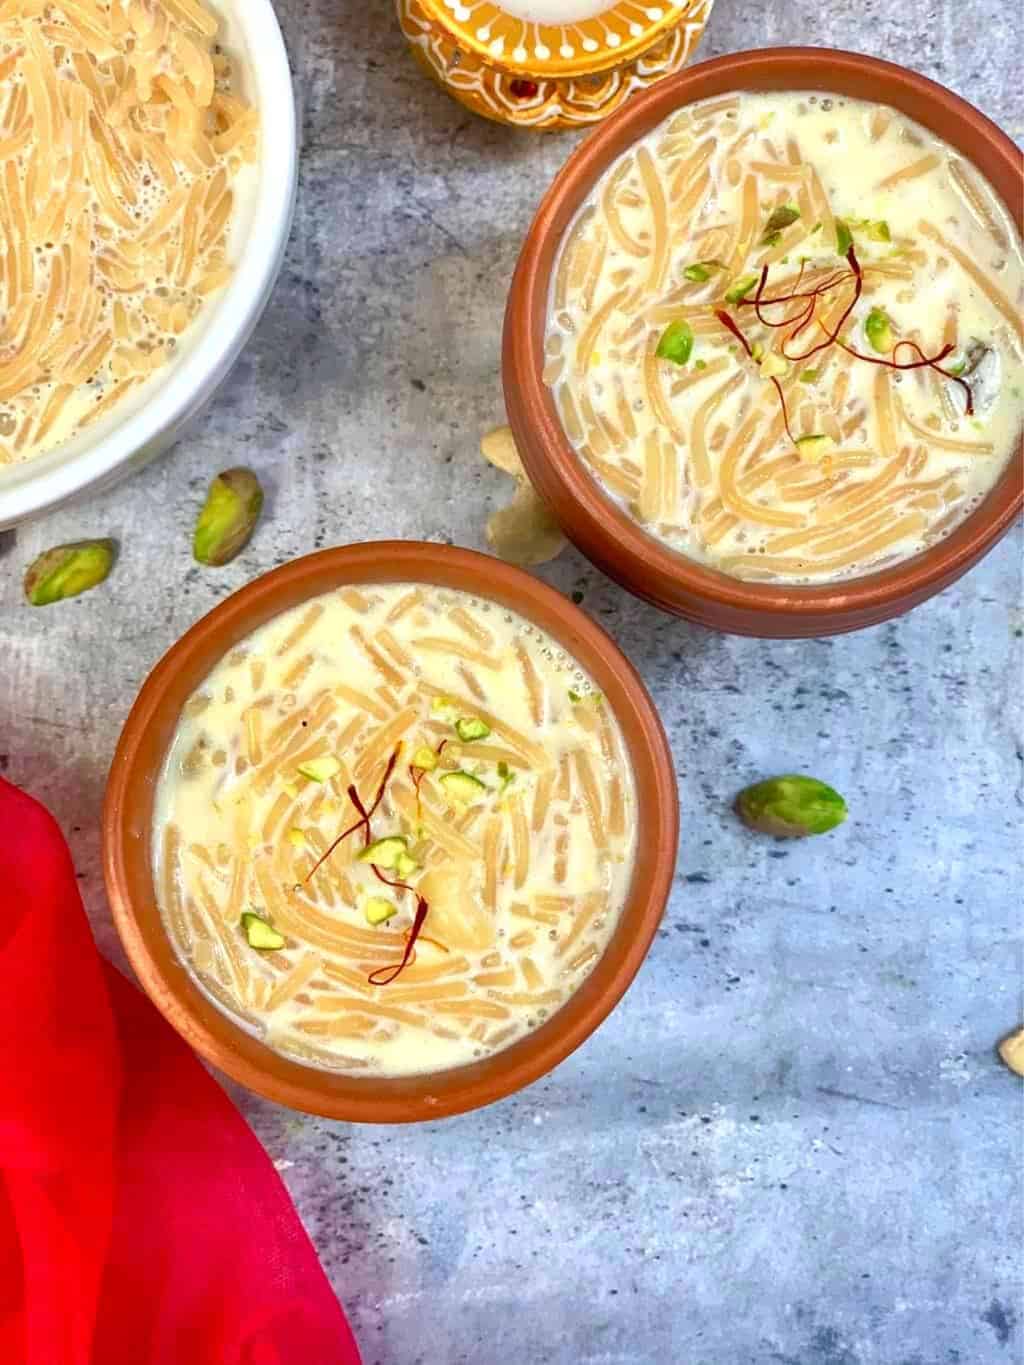 vermicelli kheer served in two mud pots garnished with nuts and saffron